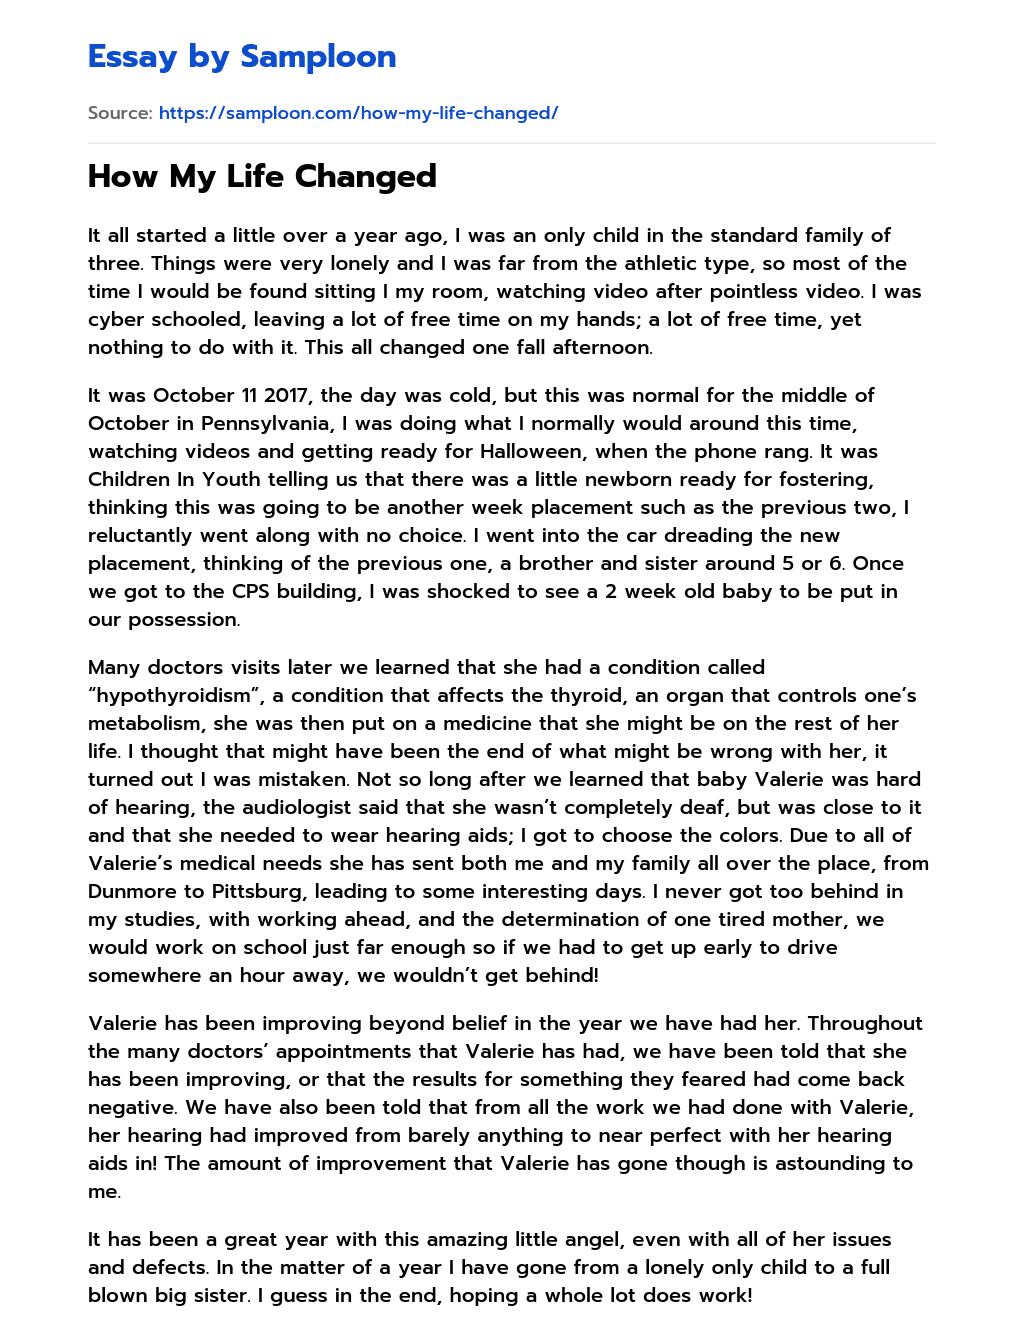 How My Life Changed essay